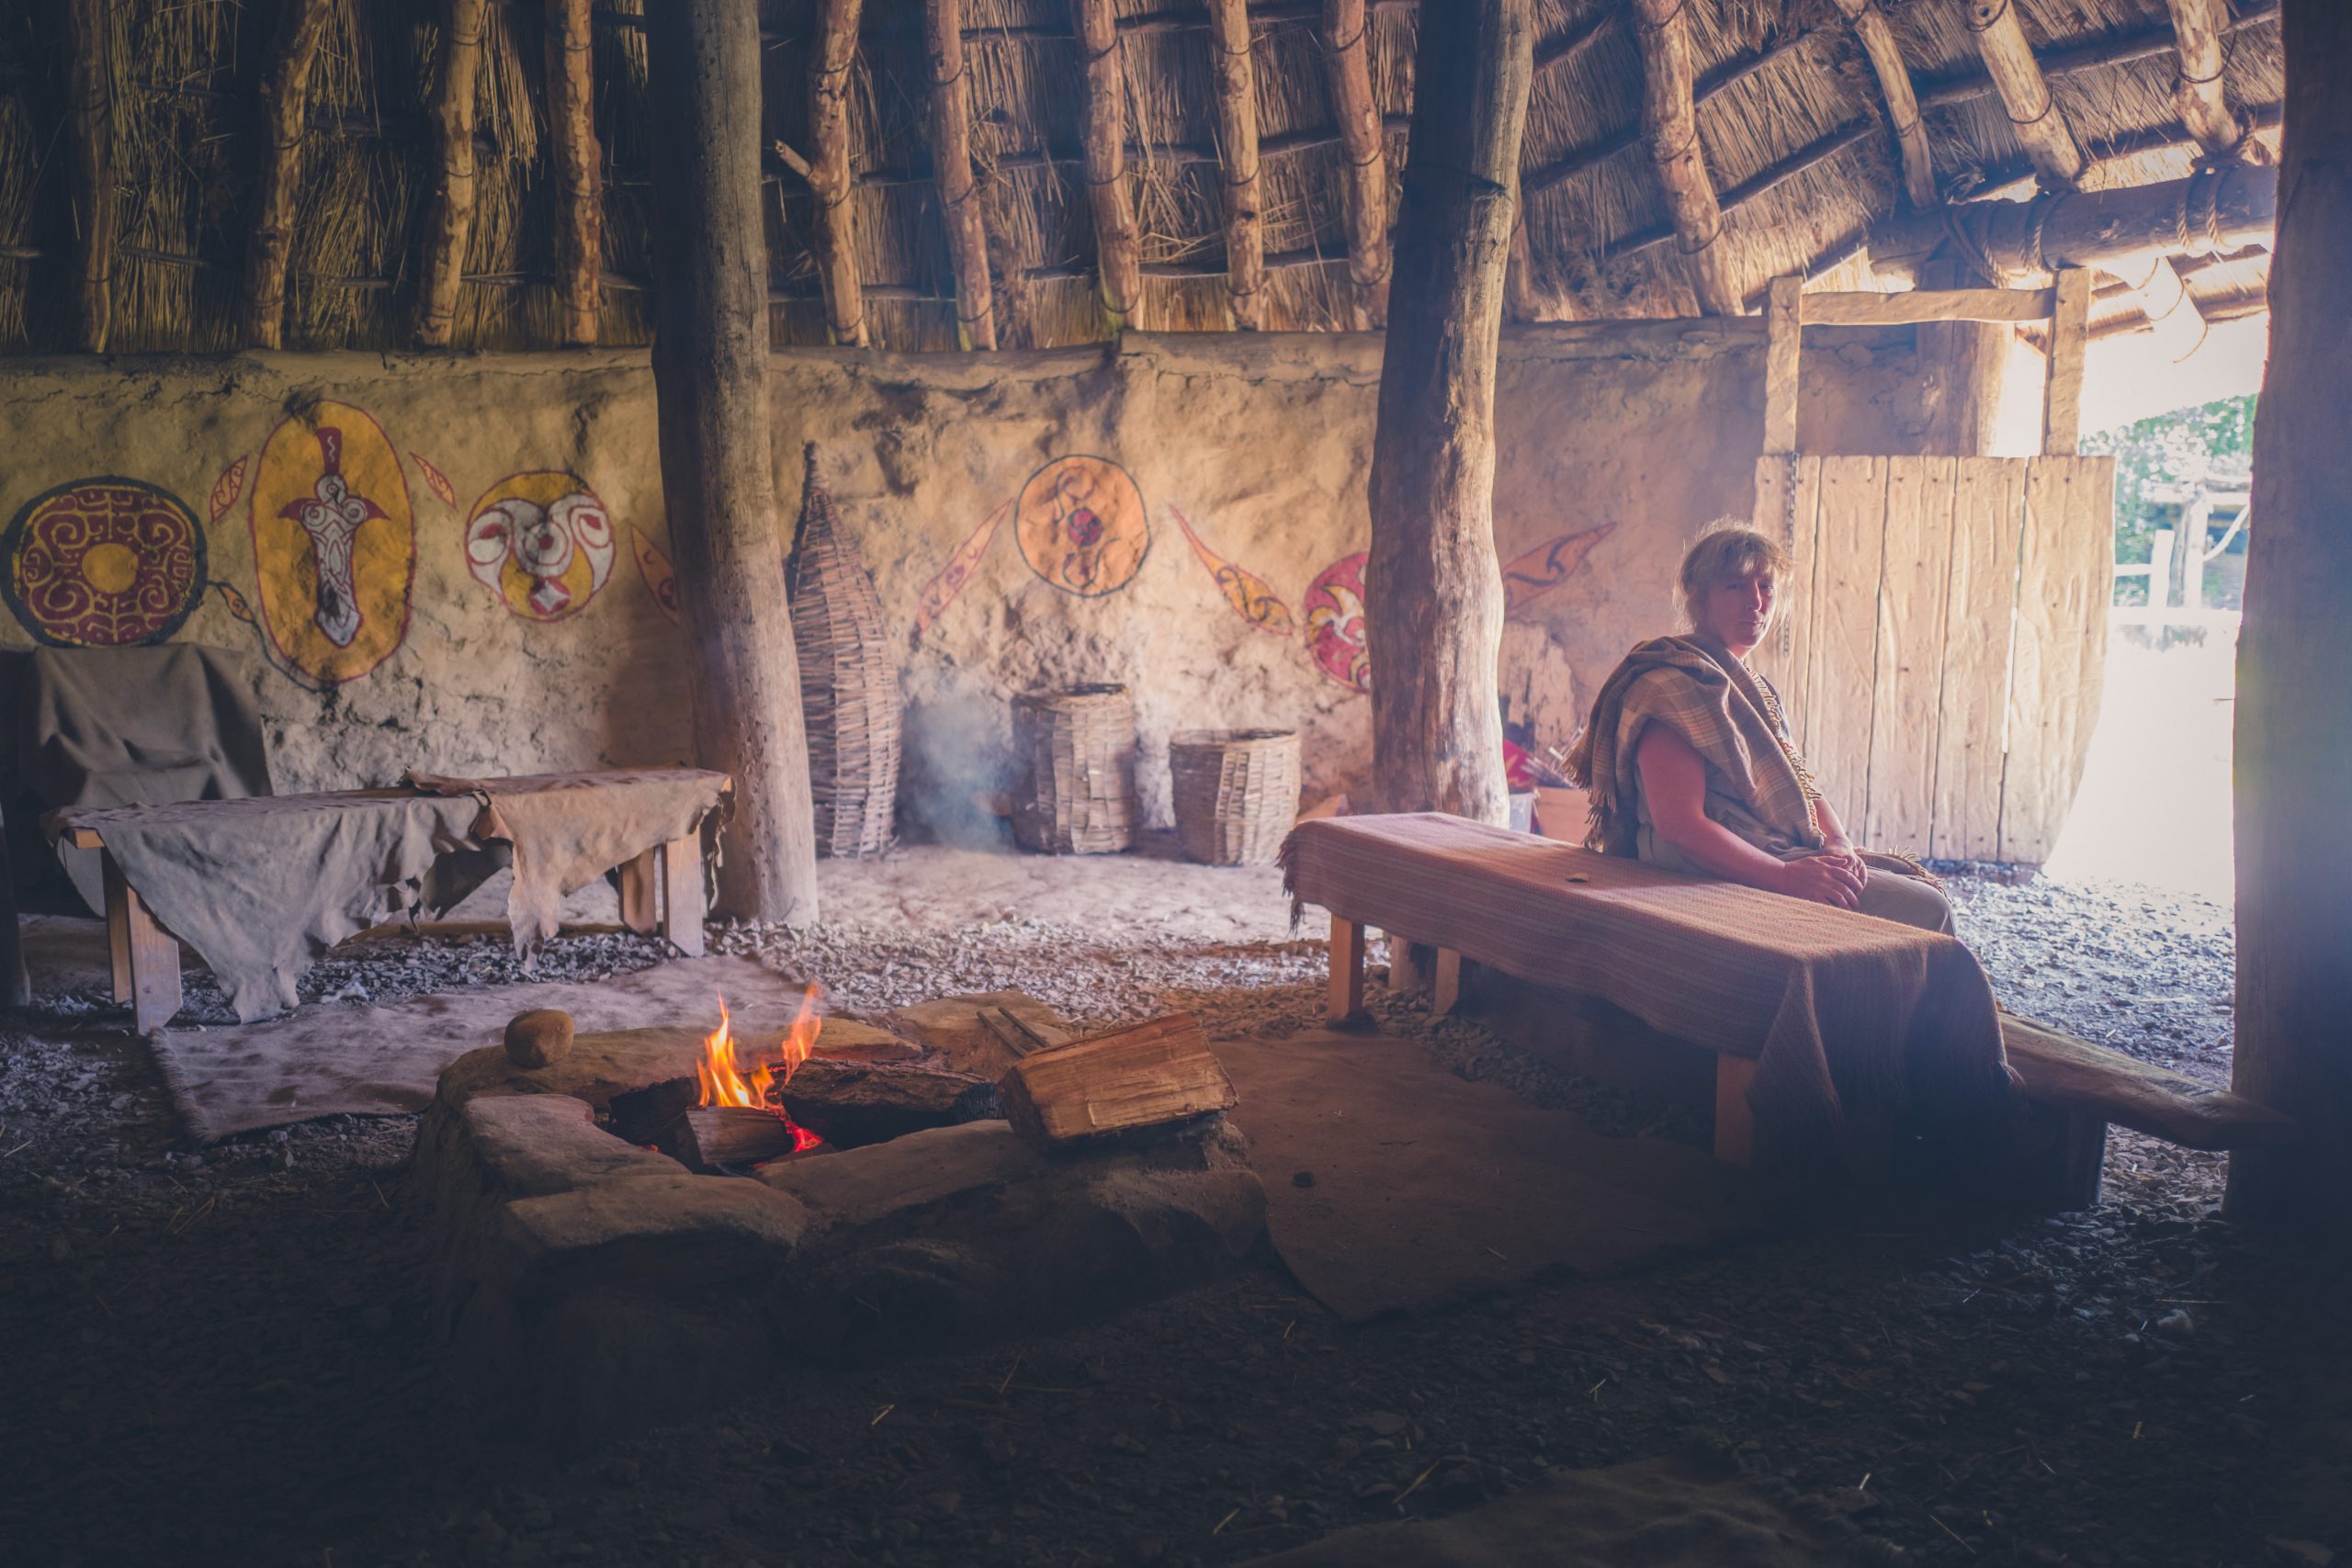 Woman dressed in Iron Age costume sitting inside roundhouse as campfire burns